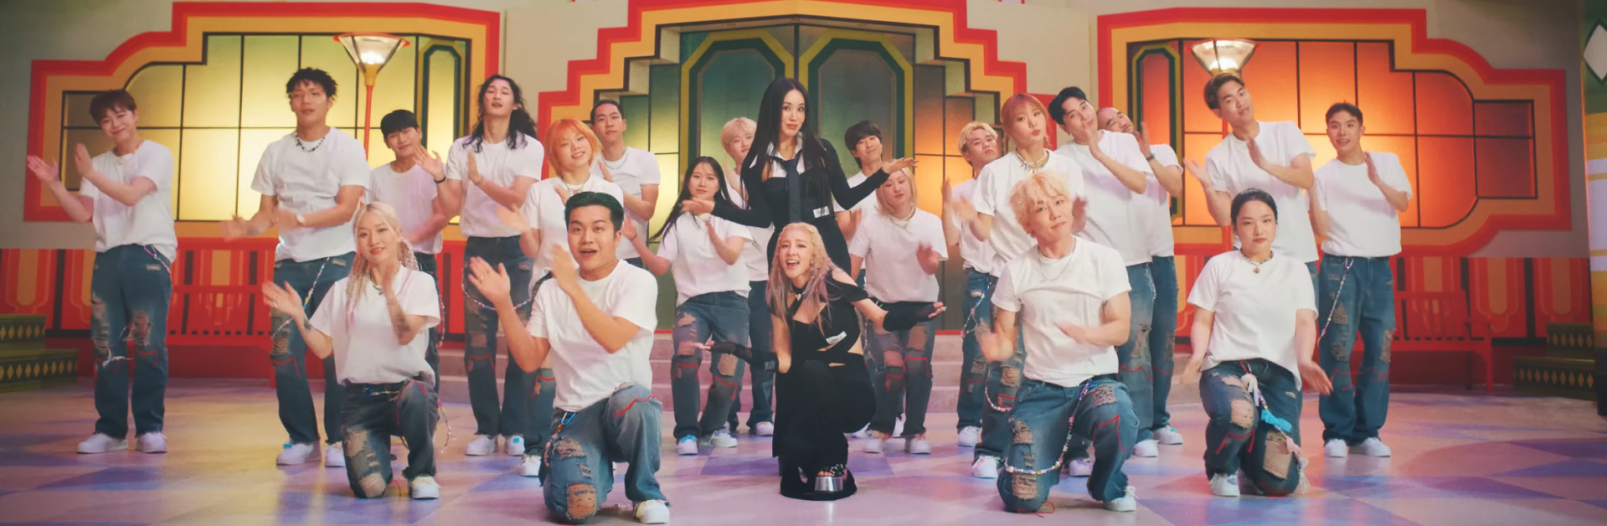 Uhm Jung Hwa and Sandara Park are posing in the middle with arms out, while surrounded by clapping backup dancers